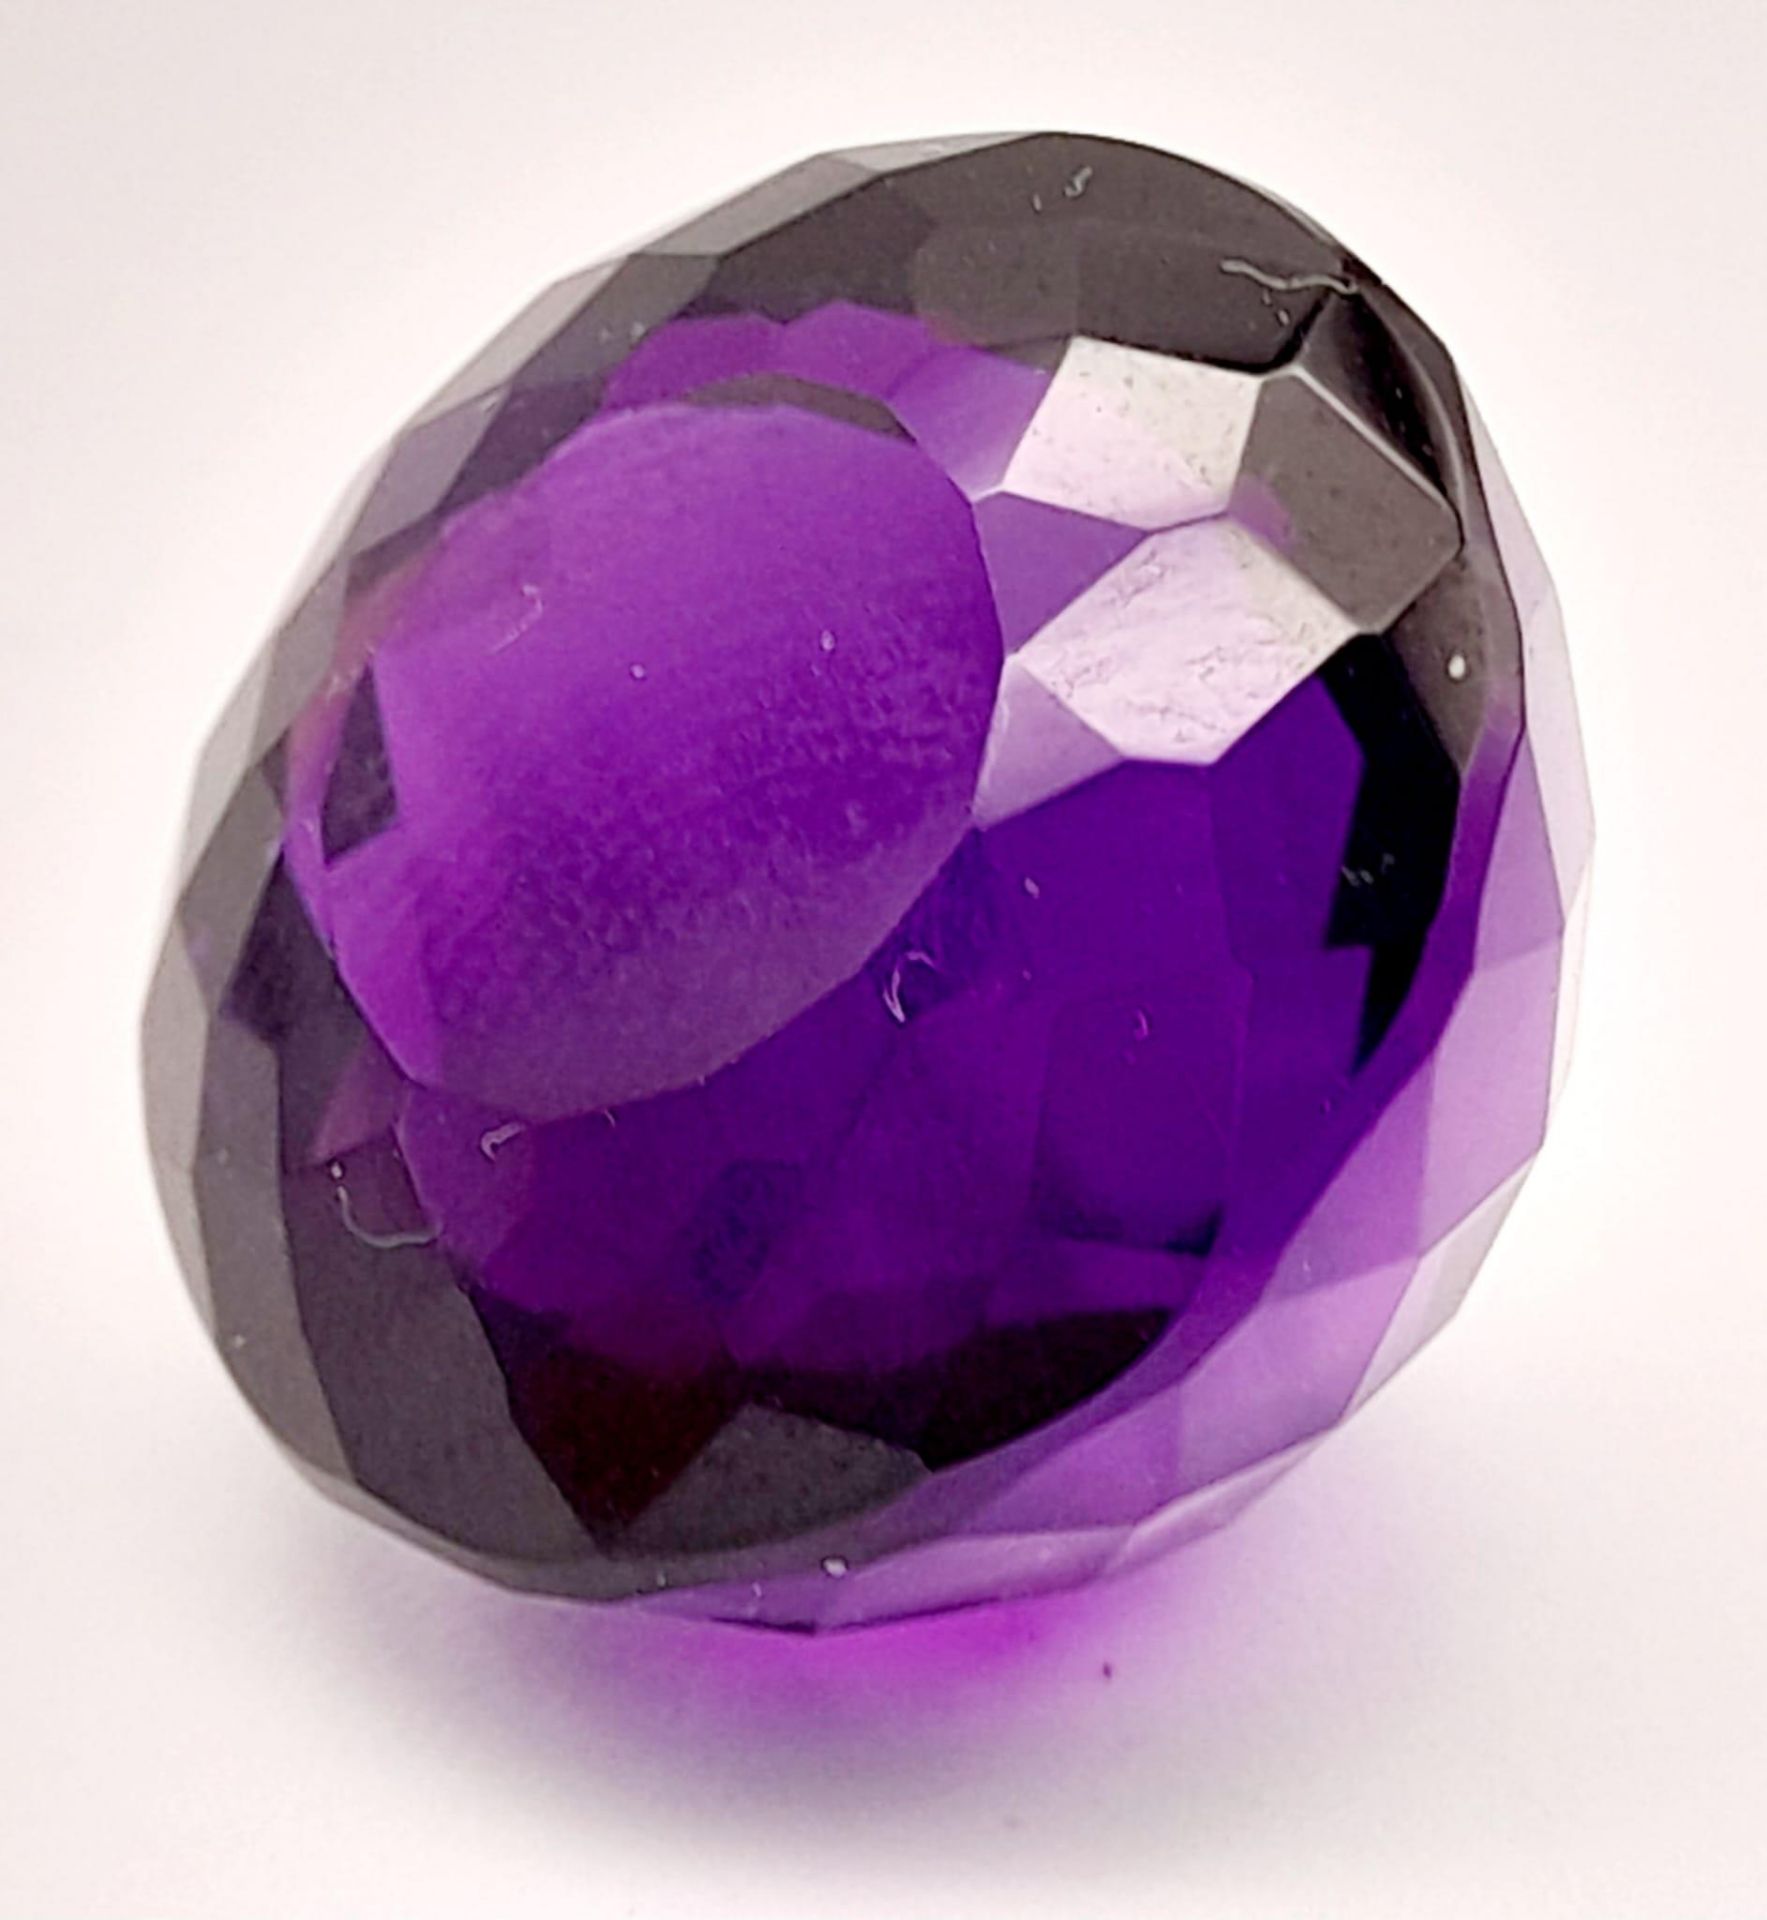 A 36ct Amethyst. Well faceted. Cushion trillion cut. 20mm x 15mm. No certificate so a/f.